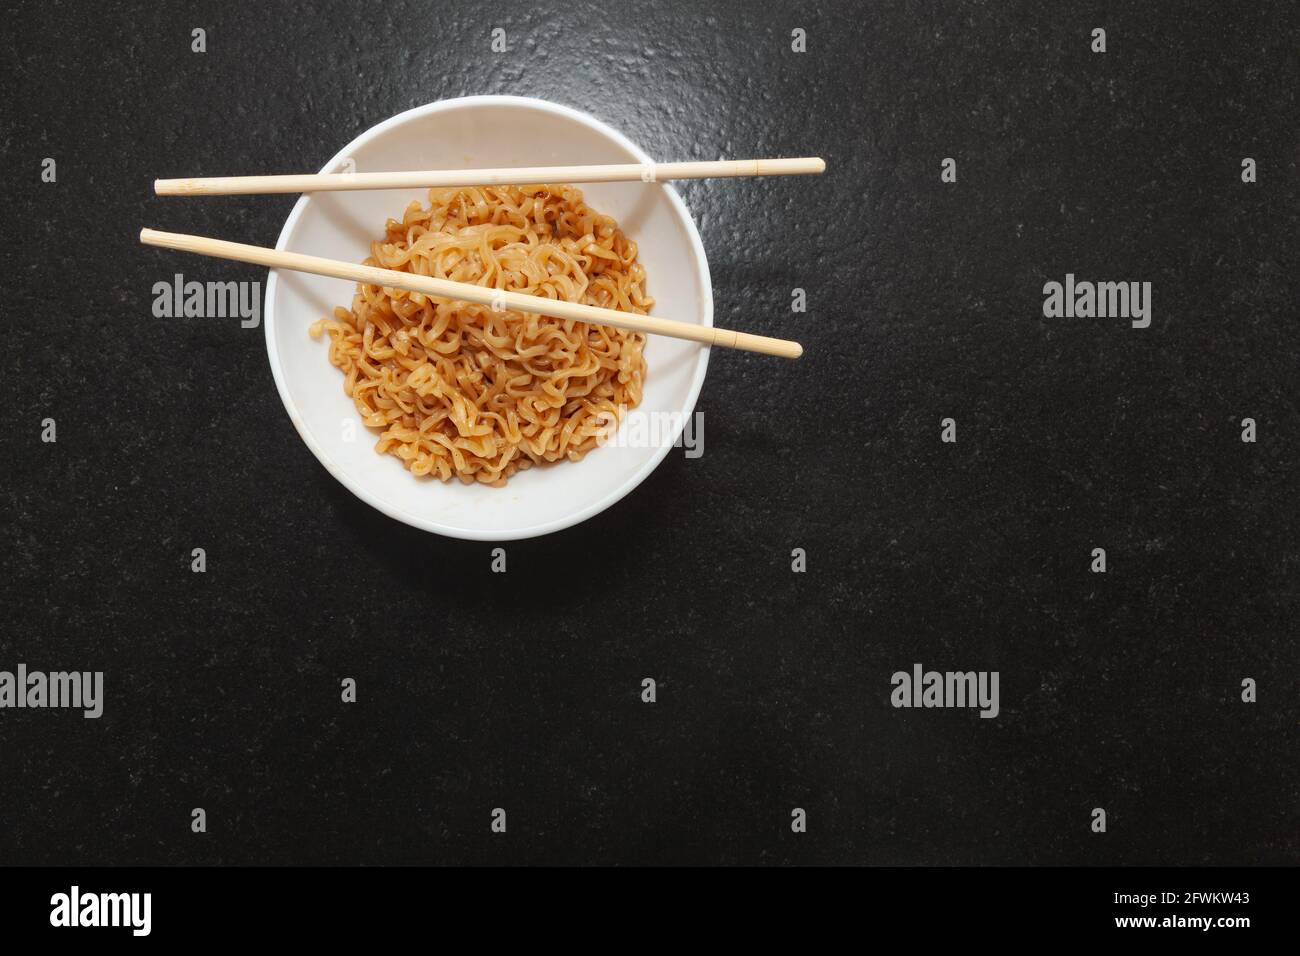 A kitchen bowl with ready-to-eat Chinese noodles. On the bowl are some oriental chopsticks. It is set on a black granite bench in a kitchen and viewed Stock Photo